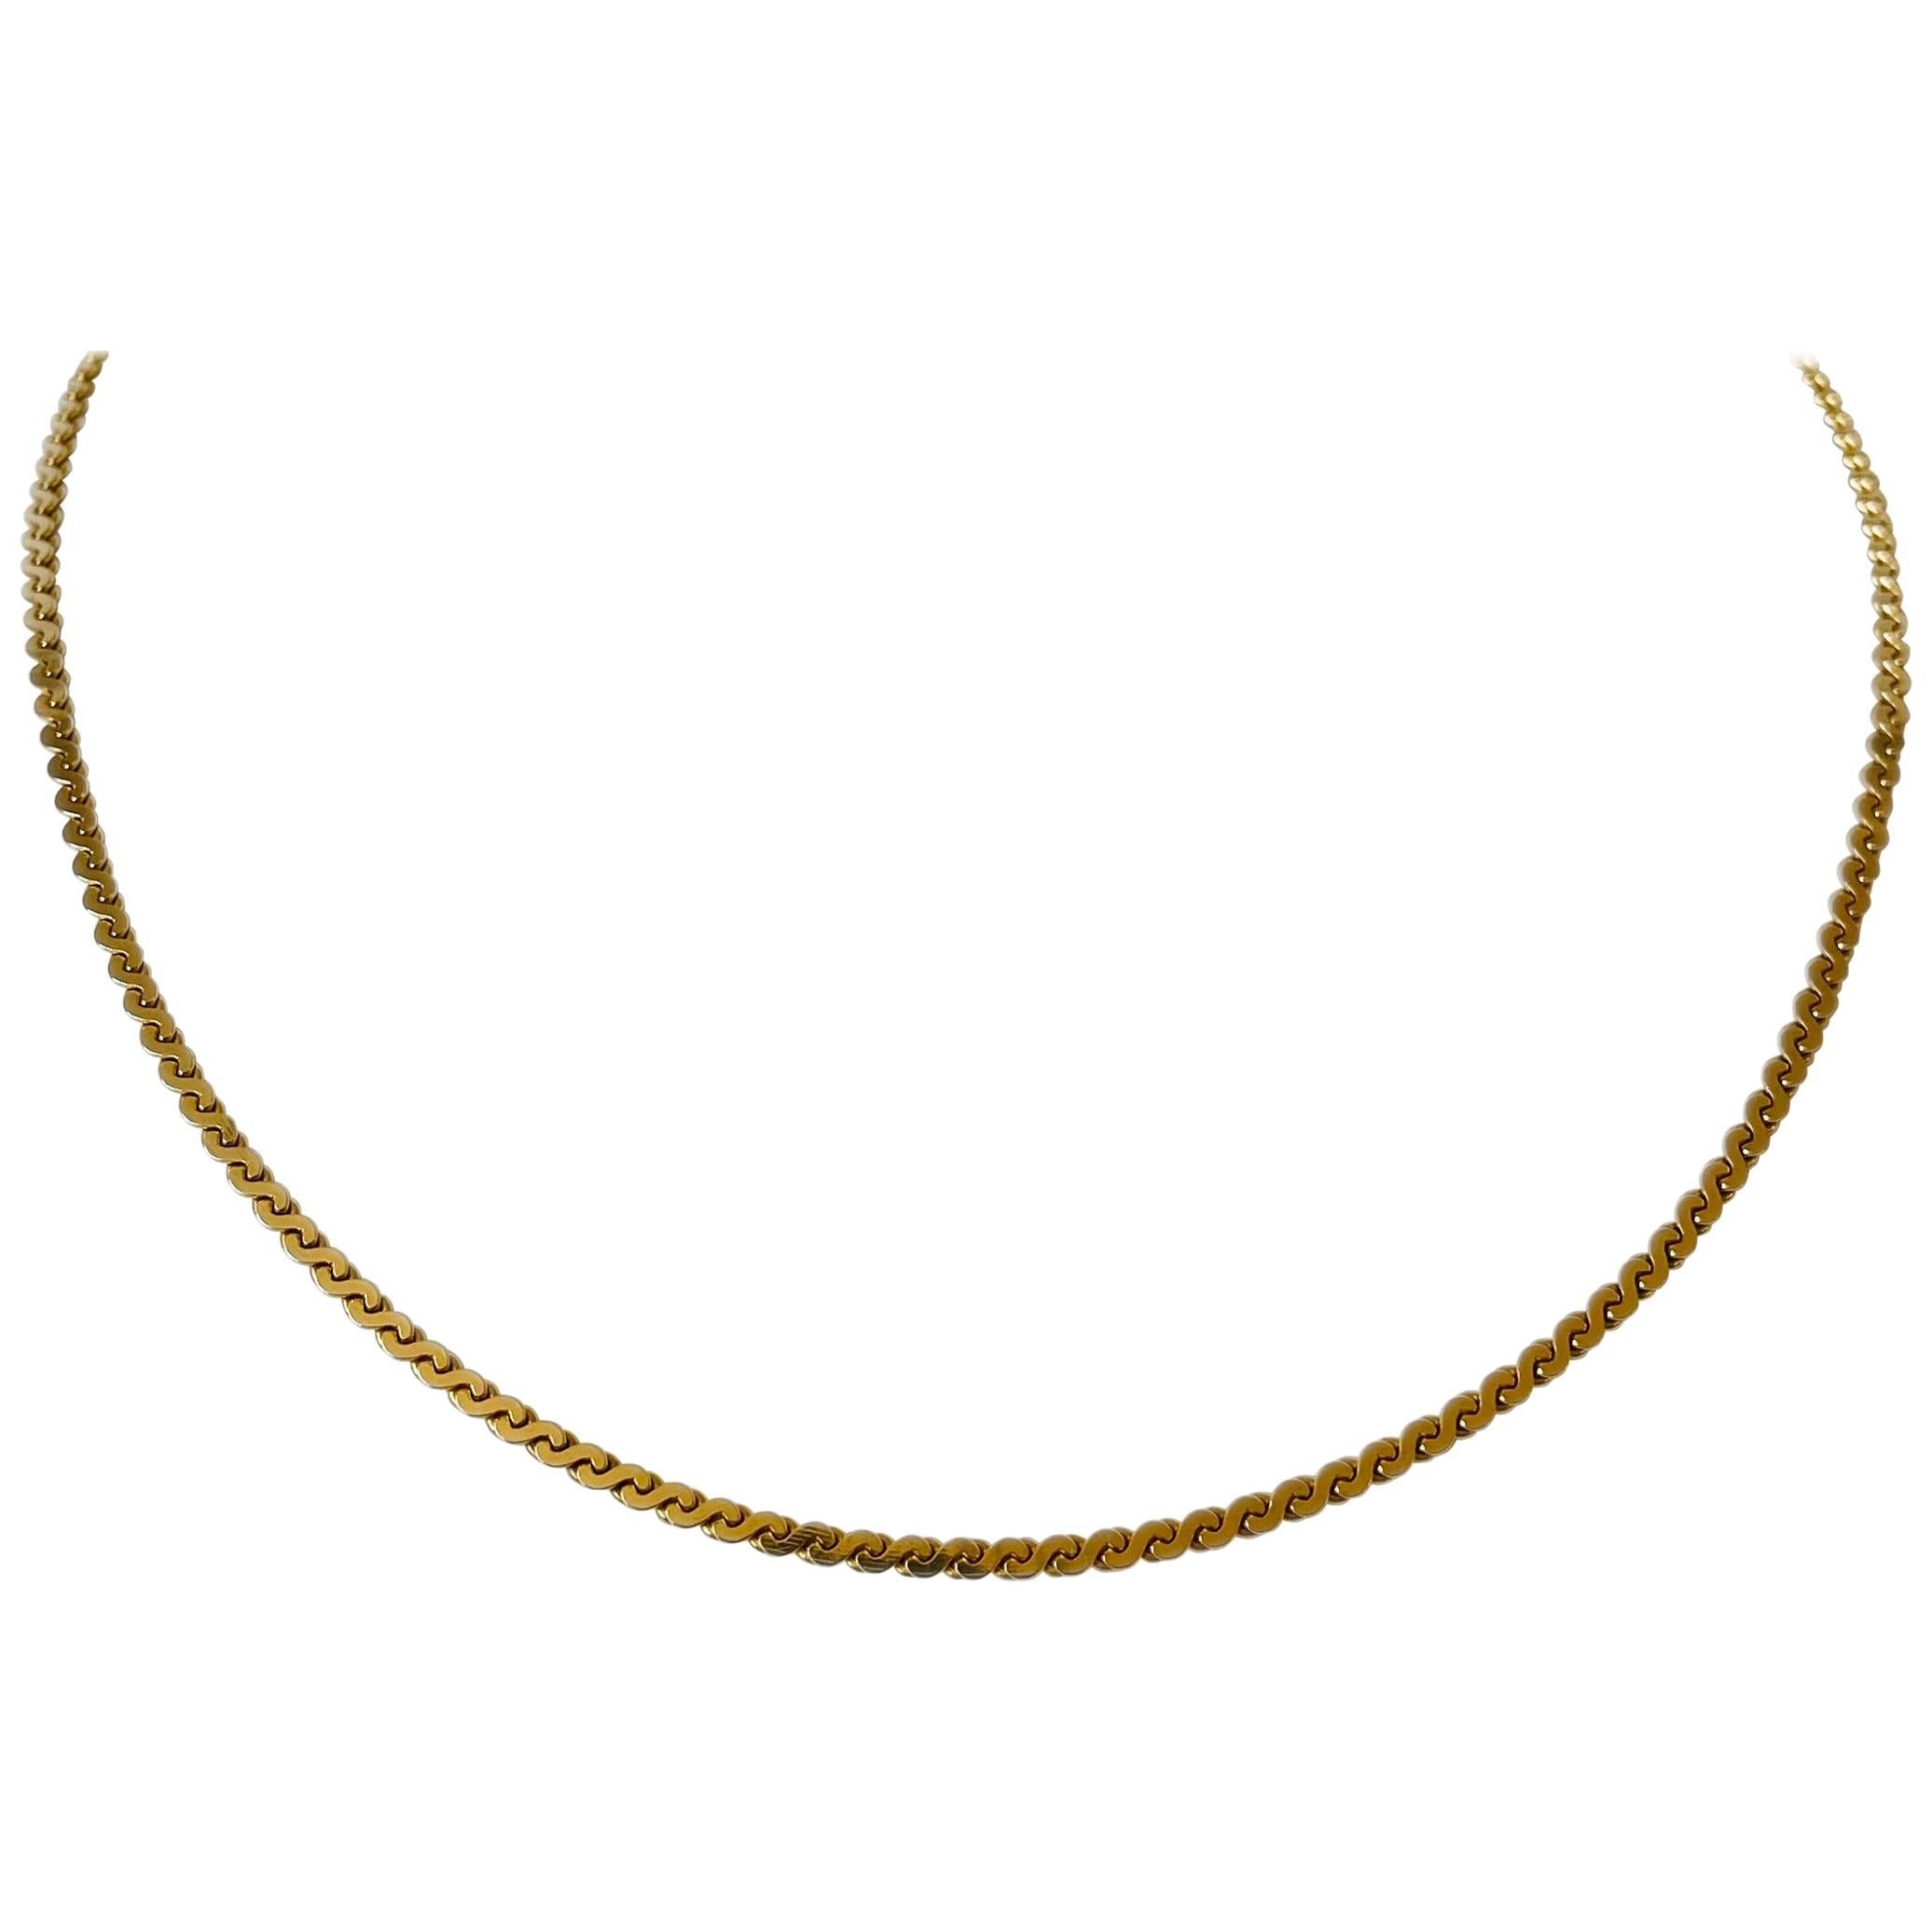 14 Karat Yellow Gold 11.8g Solid Serpentine S Link Link Chain Necklace, Italy